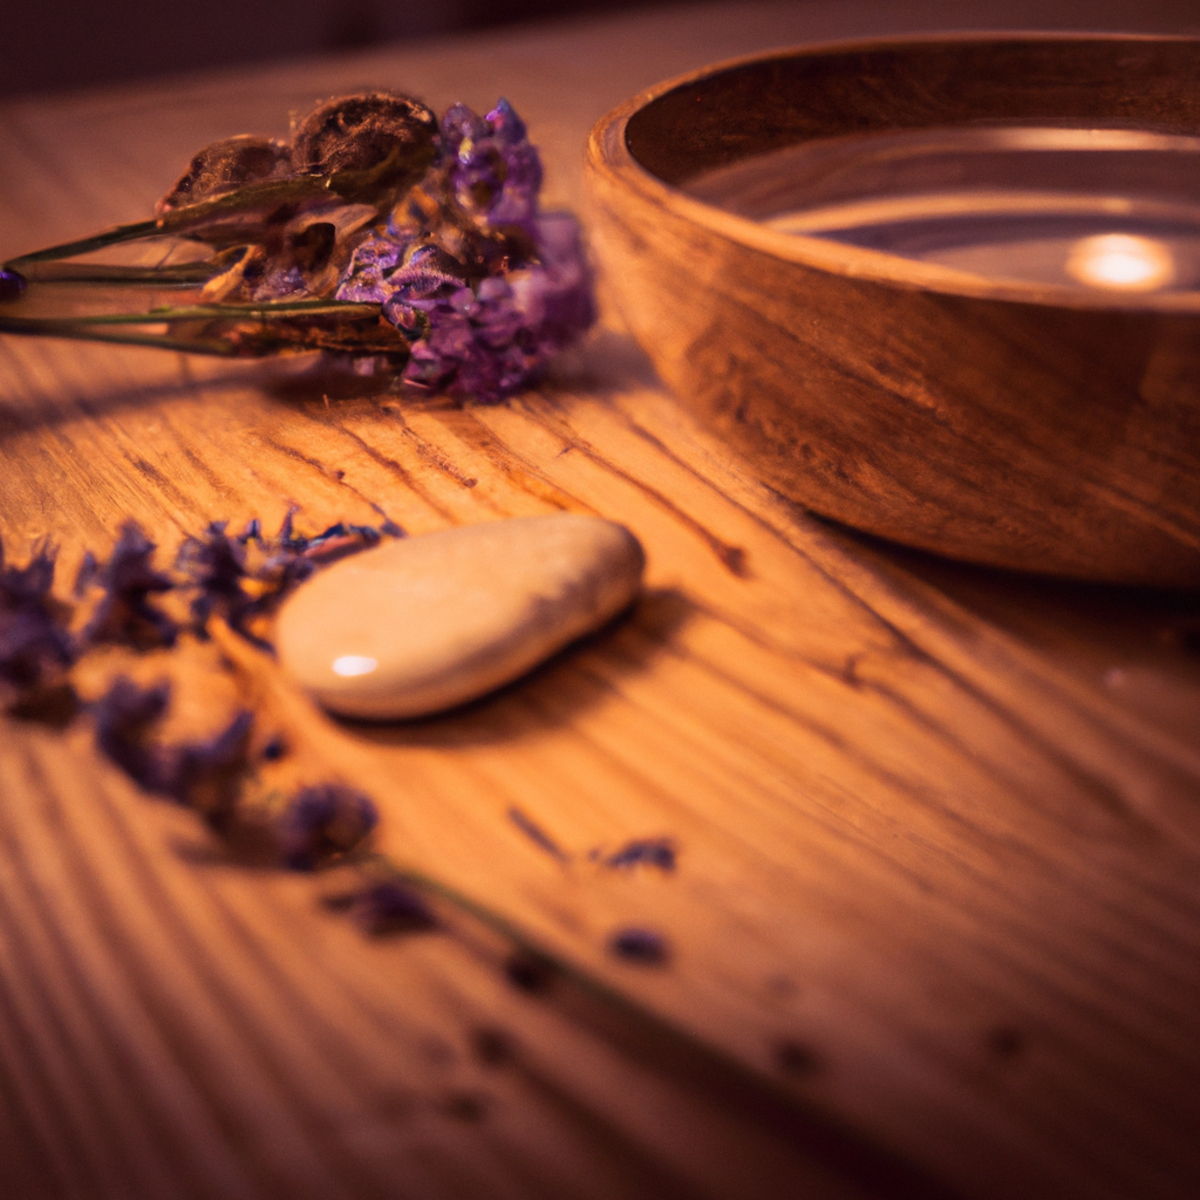 Mindfulness For Stress Reduction - Mindful arrangement of objects on wooden table with candle, stone, lavender, and water bowl with flower petals.